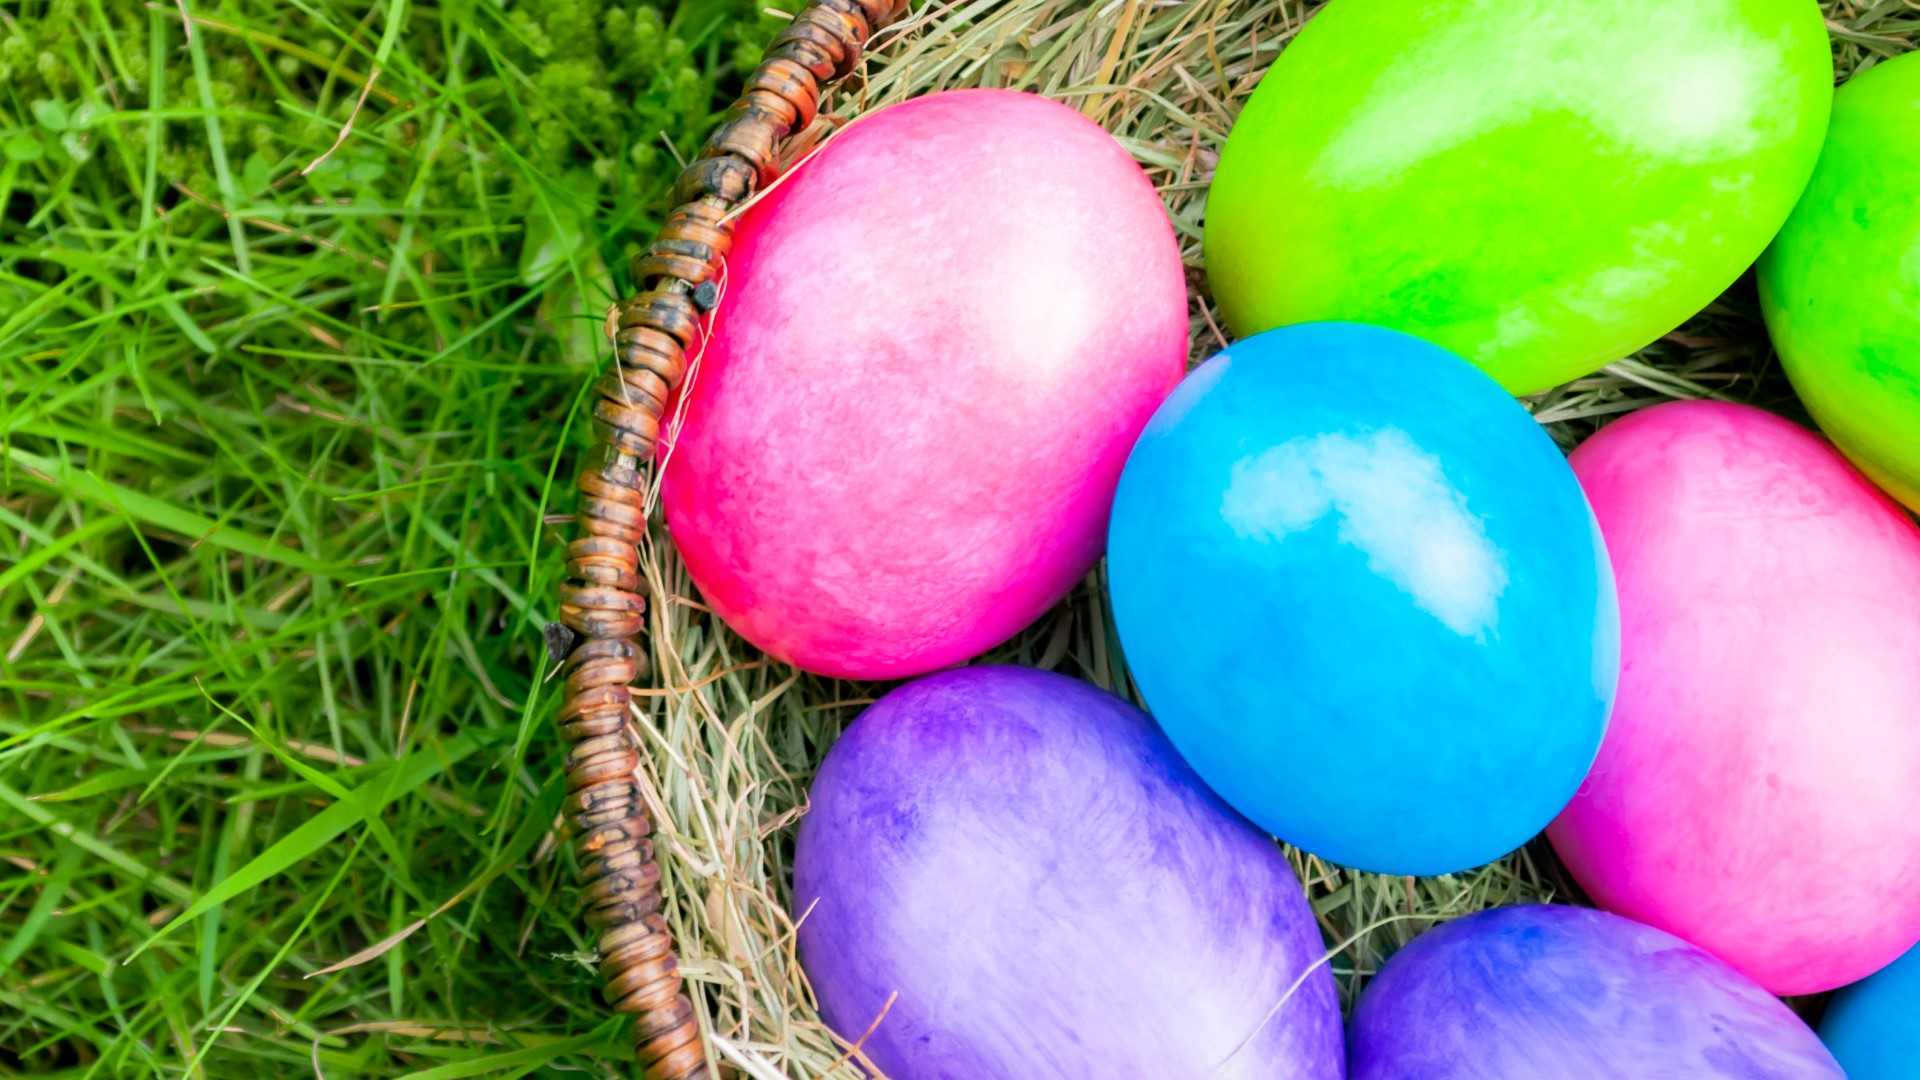 Celebrate Easter and the spring season with food, music, candy and the Easter Bunny at one of these Easter egg hunts across Colorado.